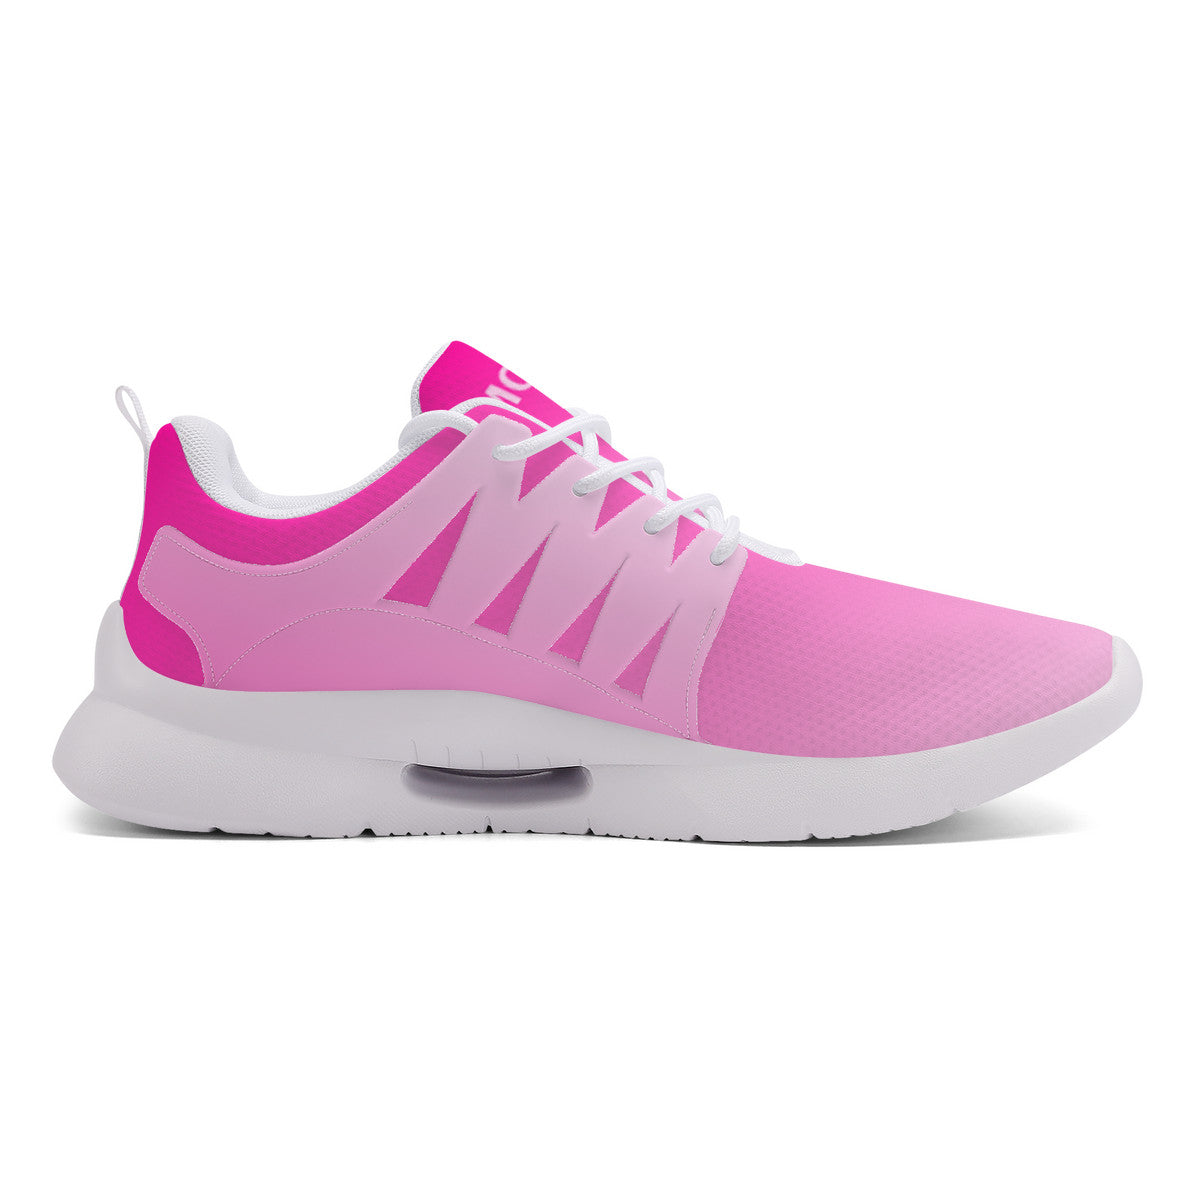 Workout Shoes - Move - Pink